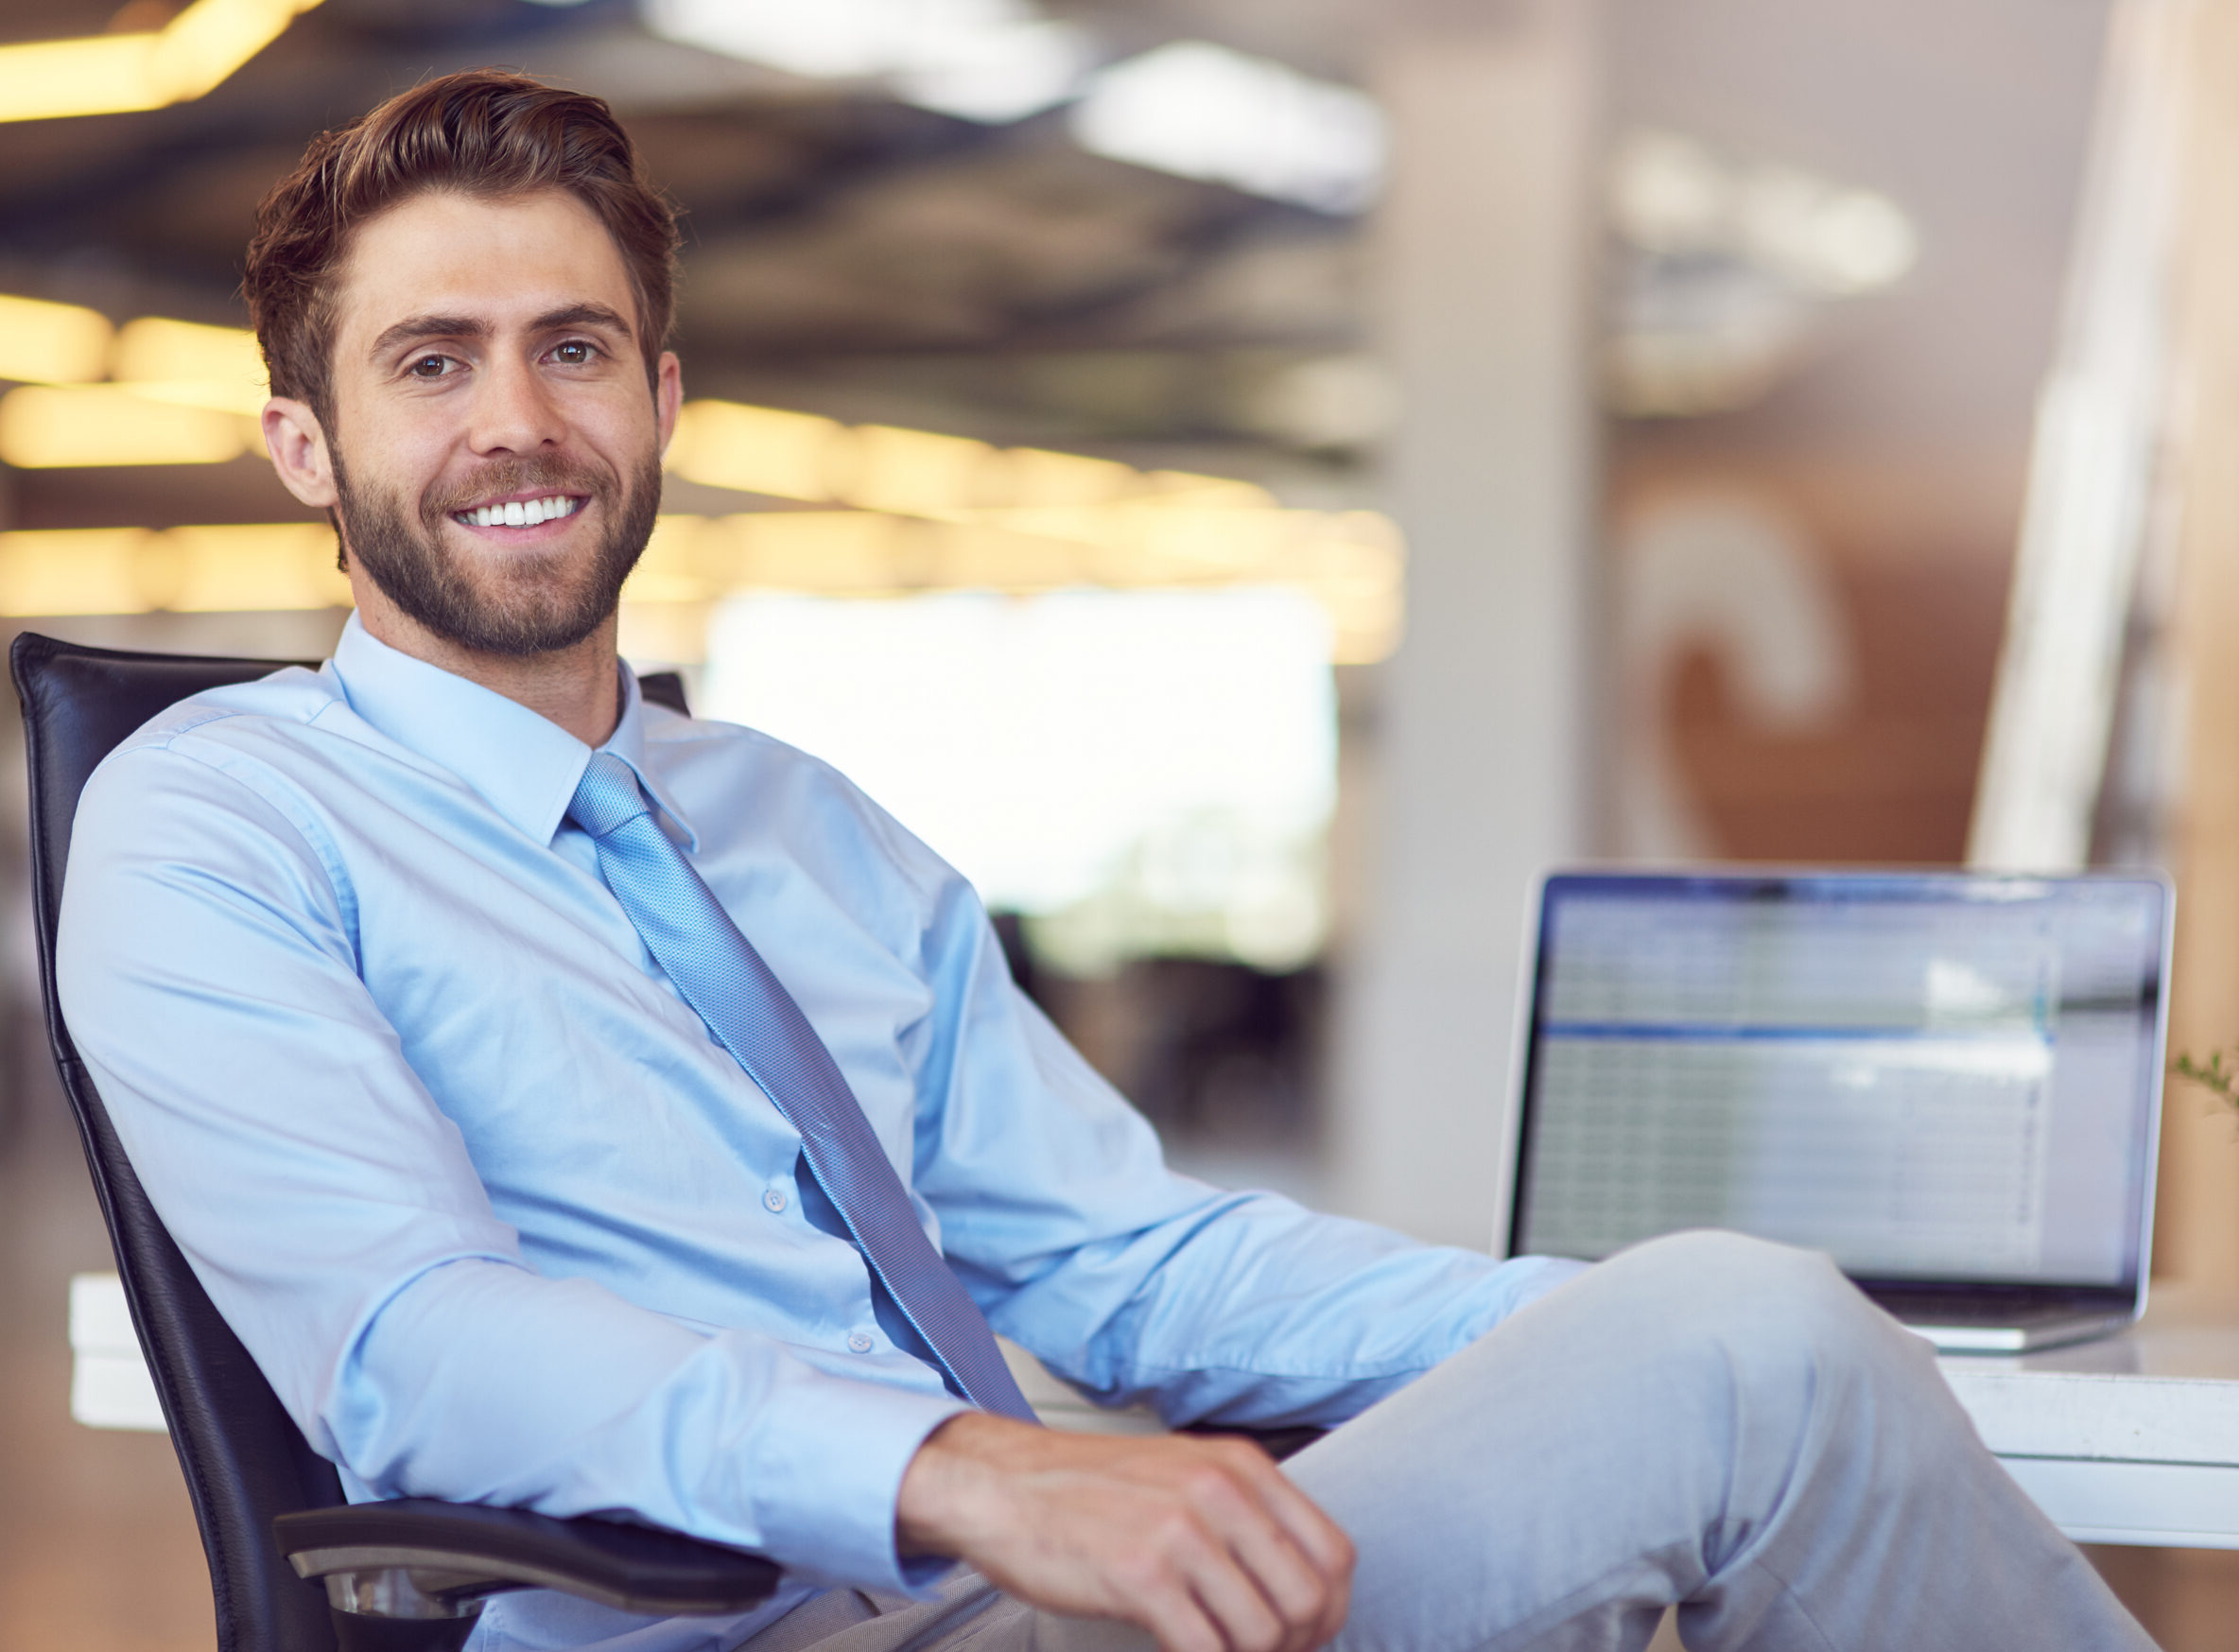 Man sitting at desk with laptop